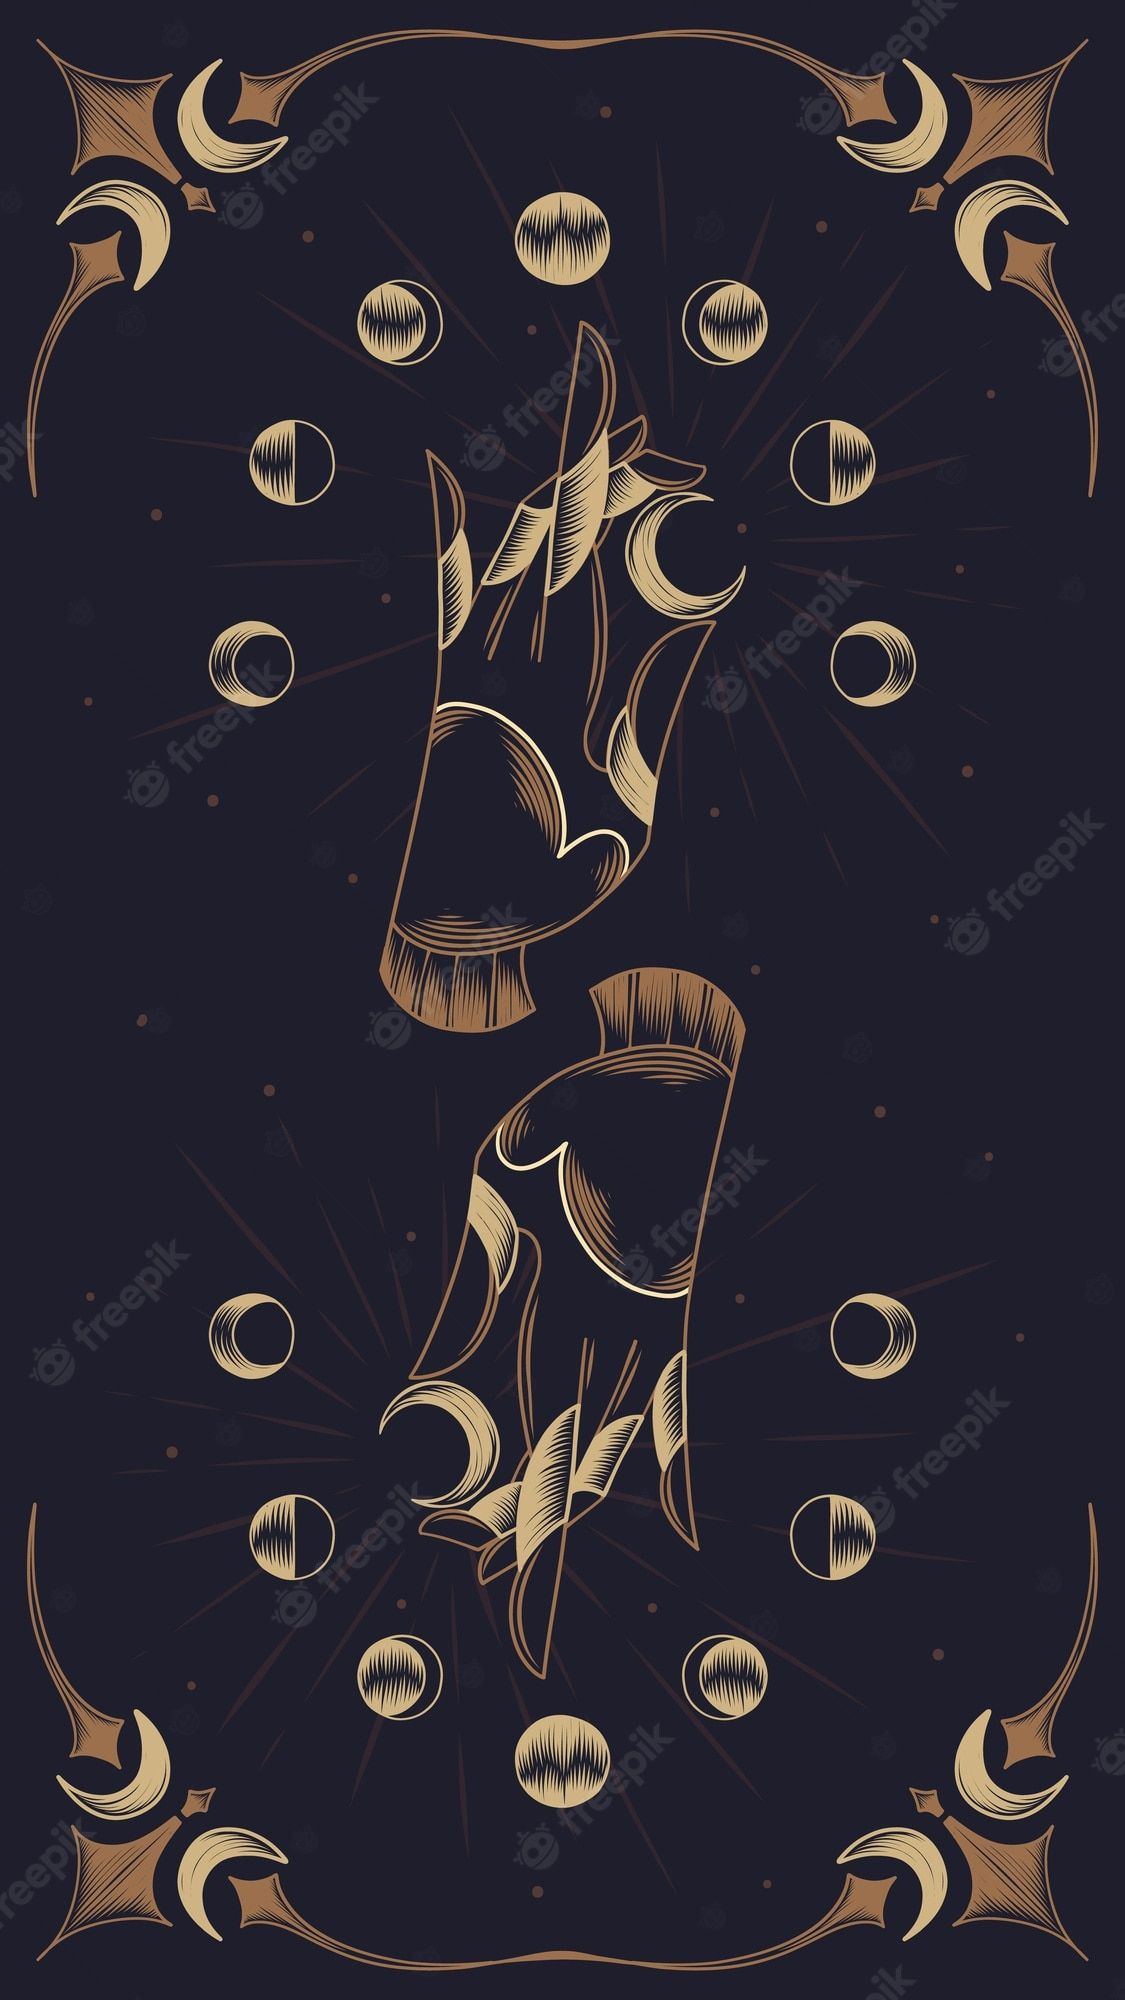 Tarot background Vectors & Illustrations for Free Download